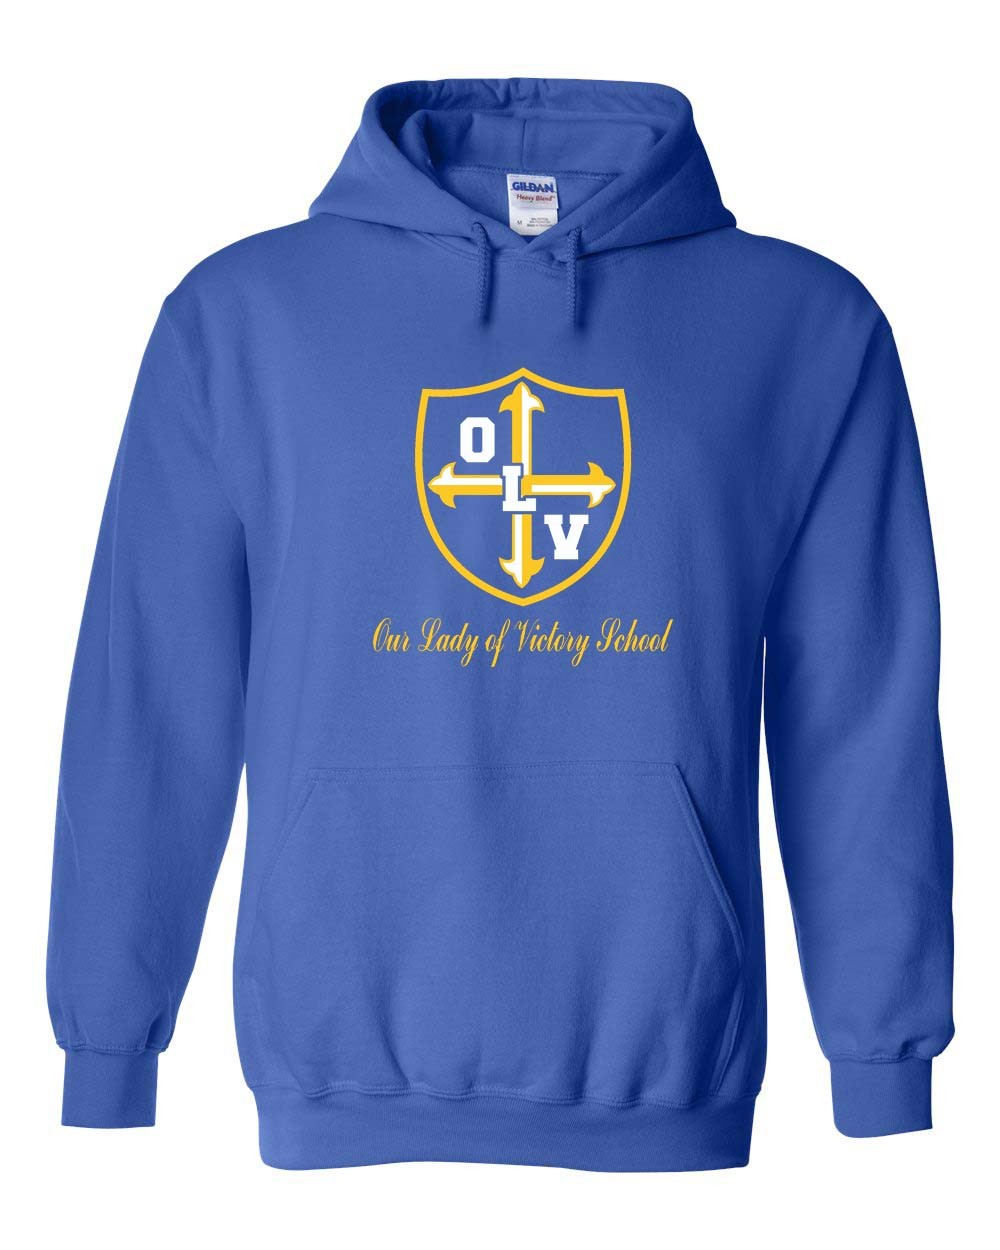 OLV Spirit Pullover Hoodie w/ Gold Logo - Please Allow 2-3 Weeks for Delivery